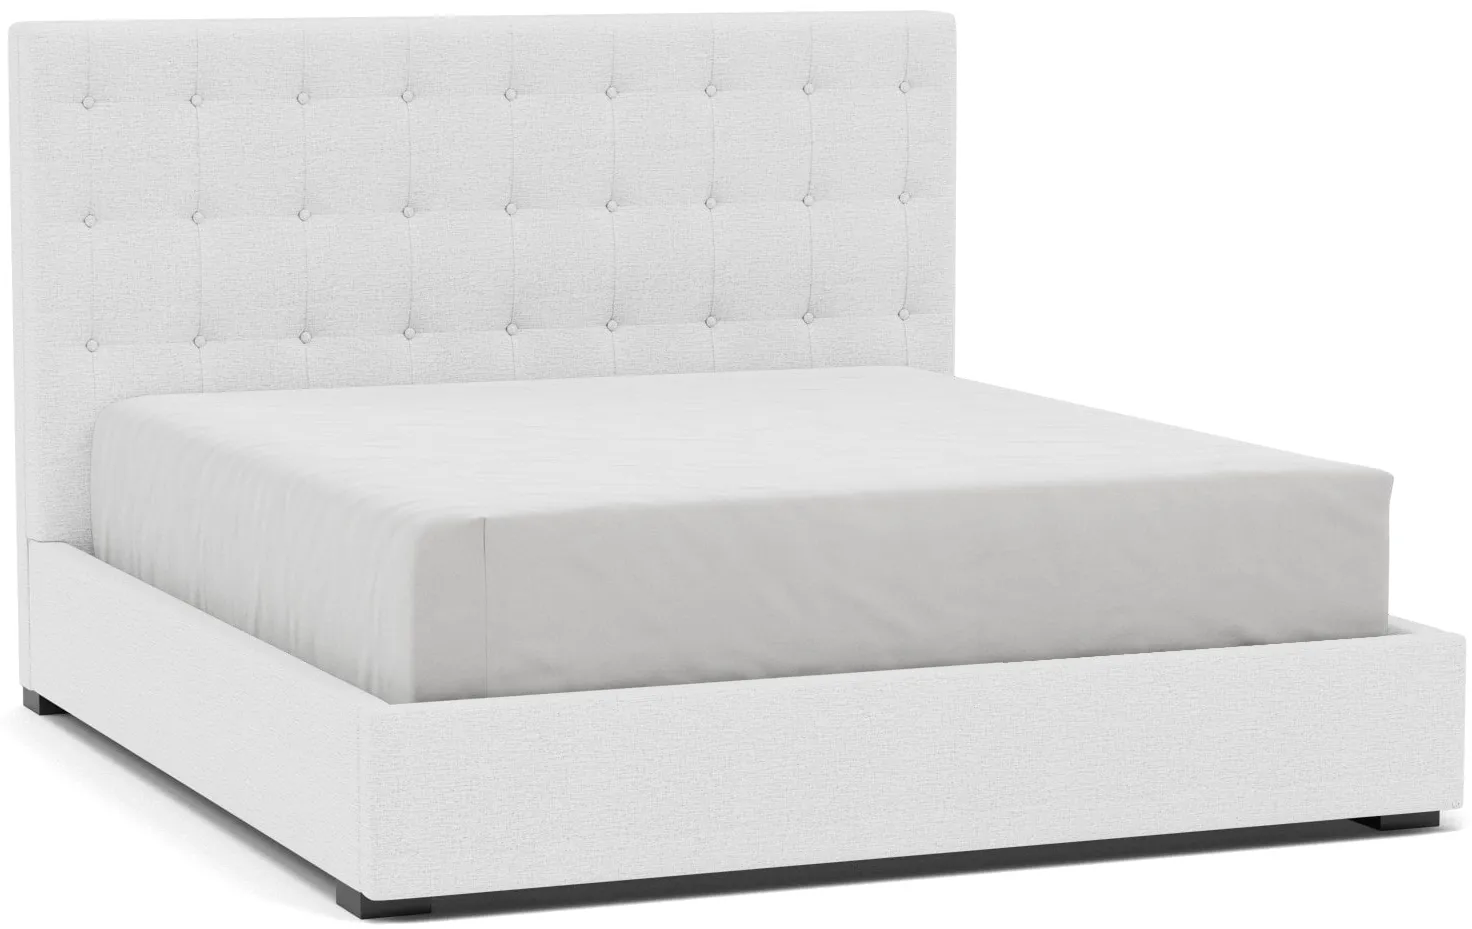 Abby King Upholstered Bed in Tech Pebble